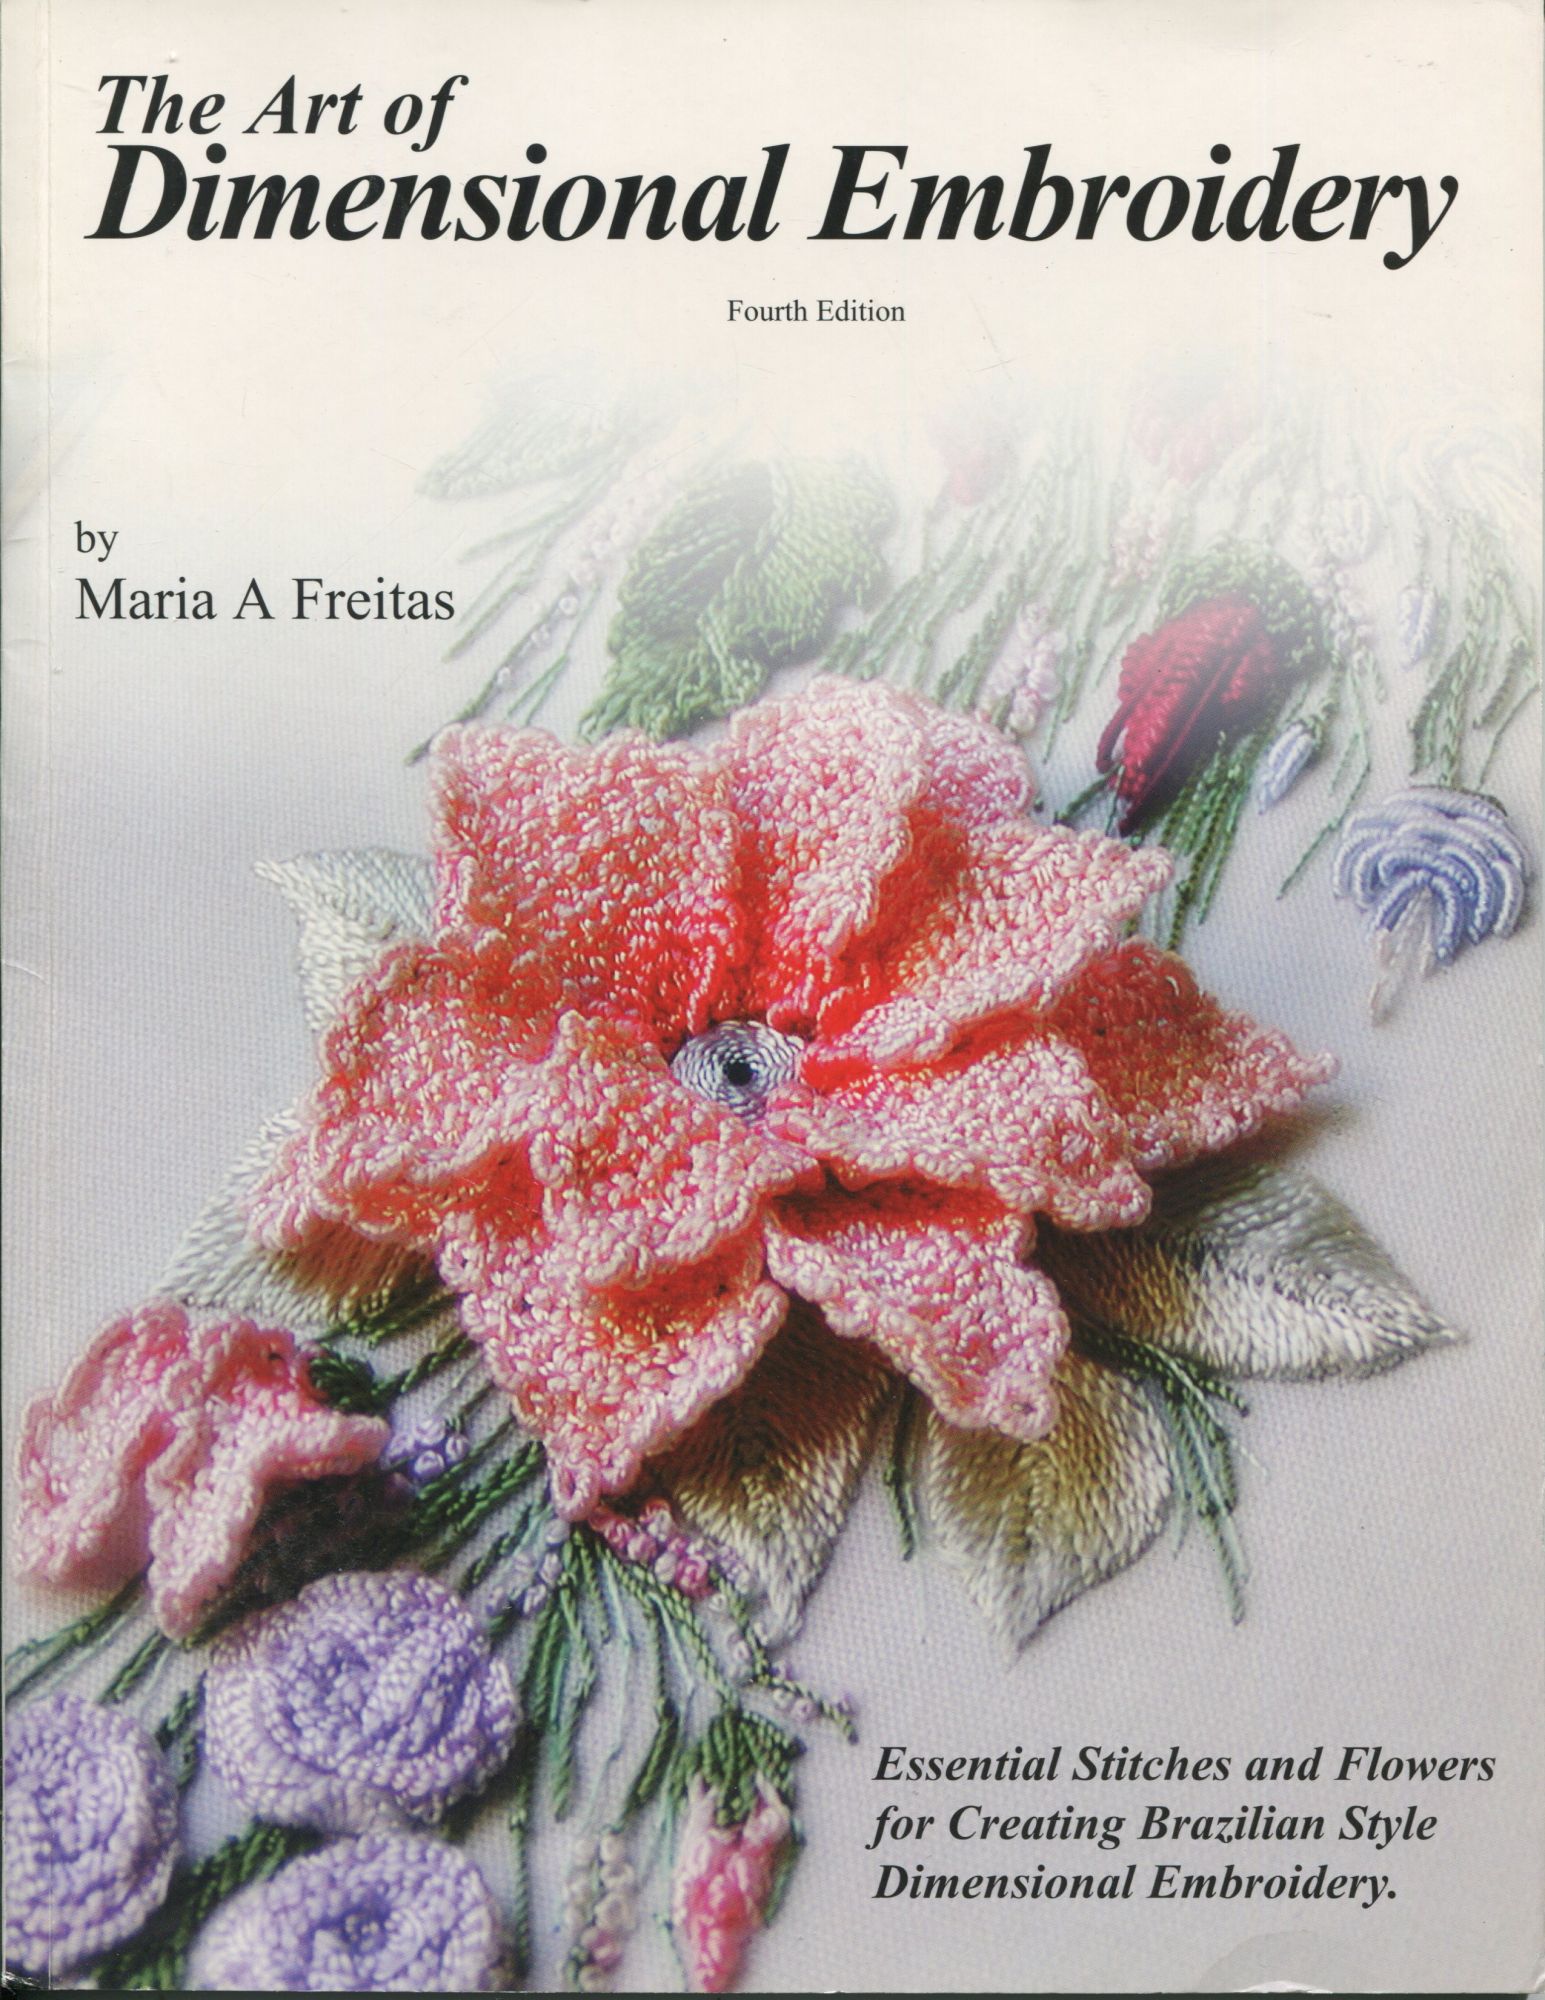 The Art of Dimensional Embroidery; Fourth Edition, Maria A. Freitas